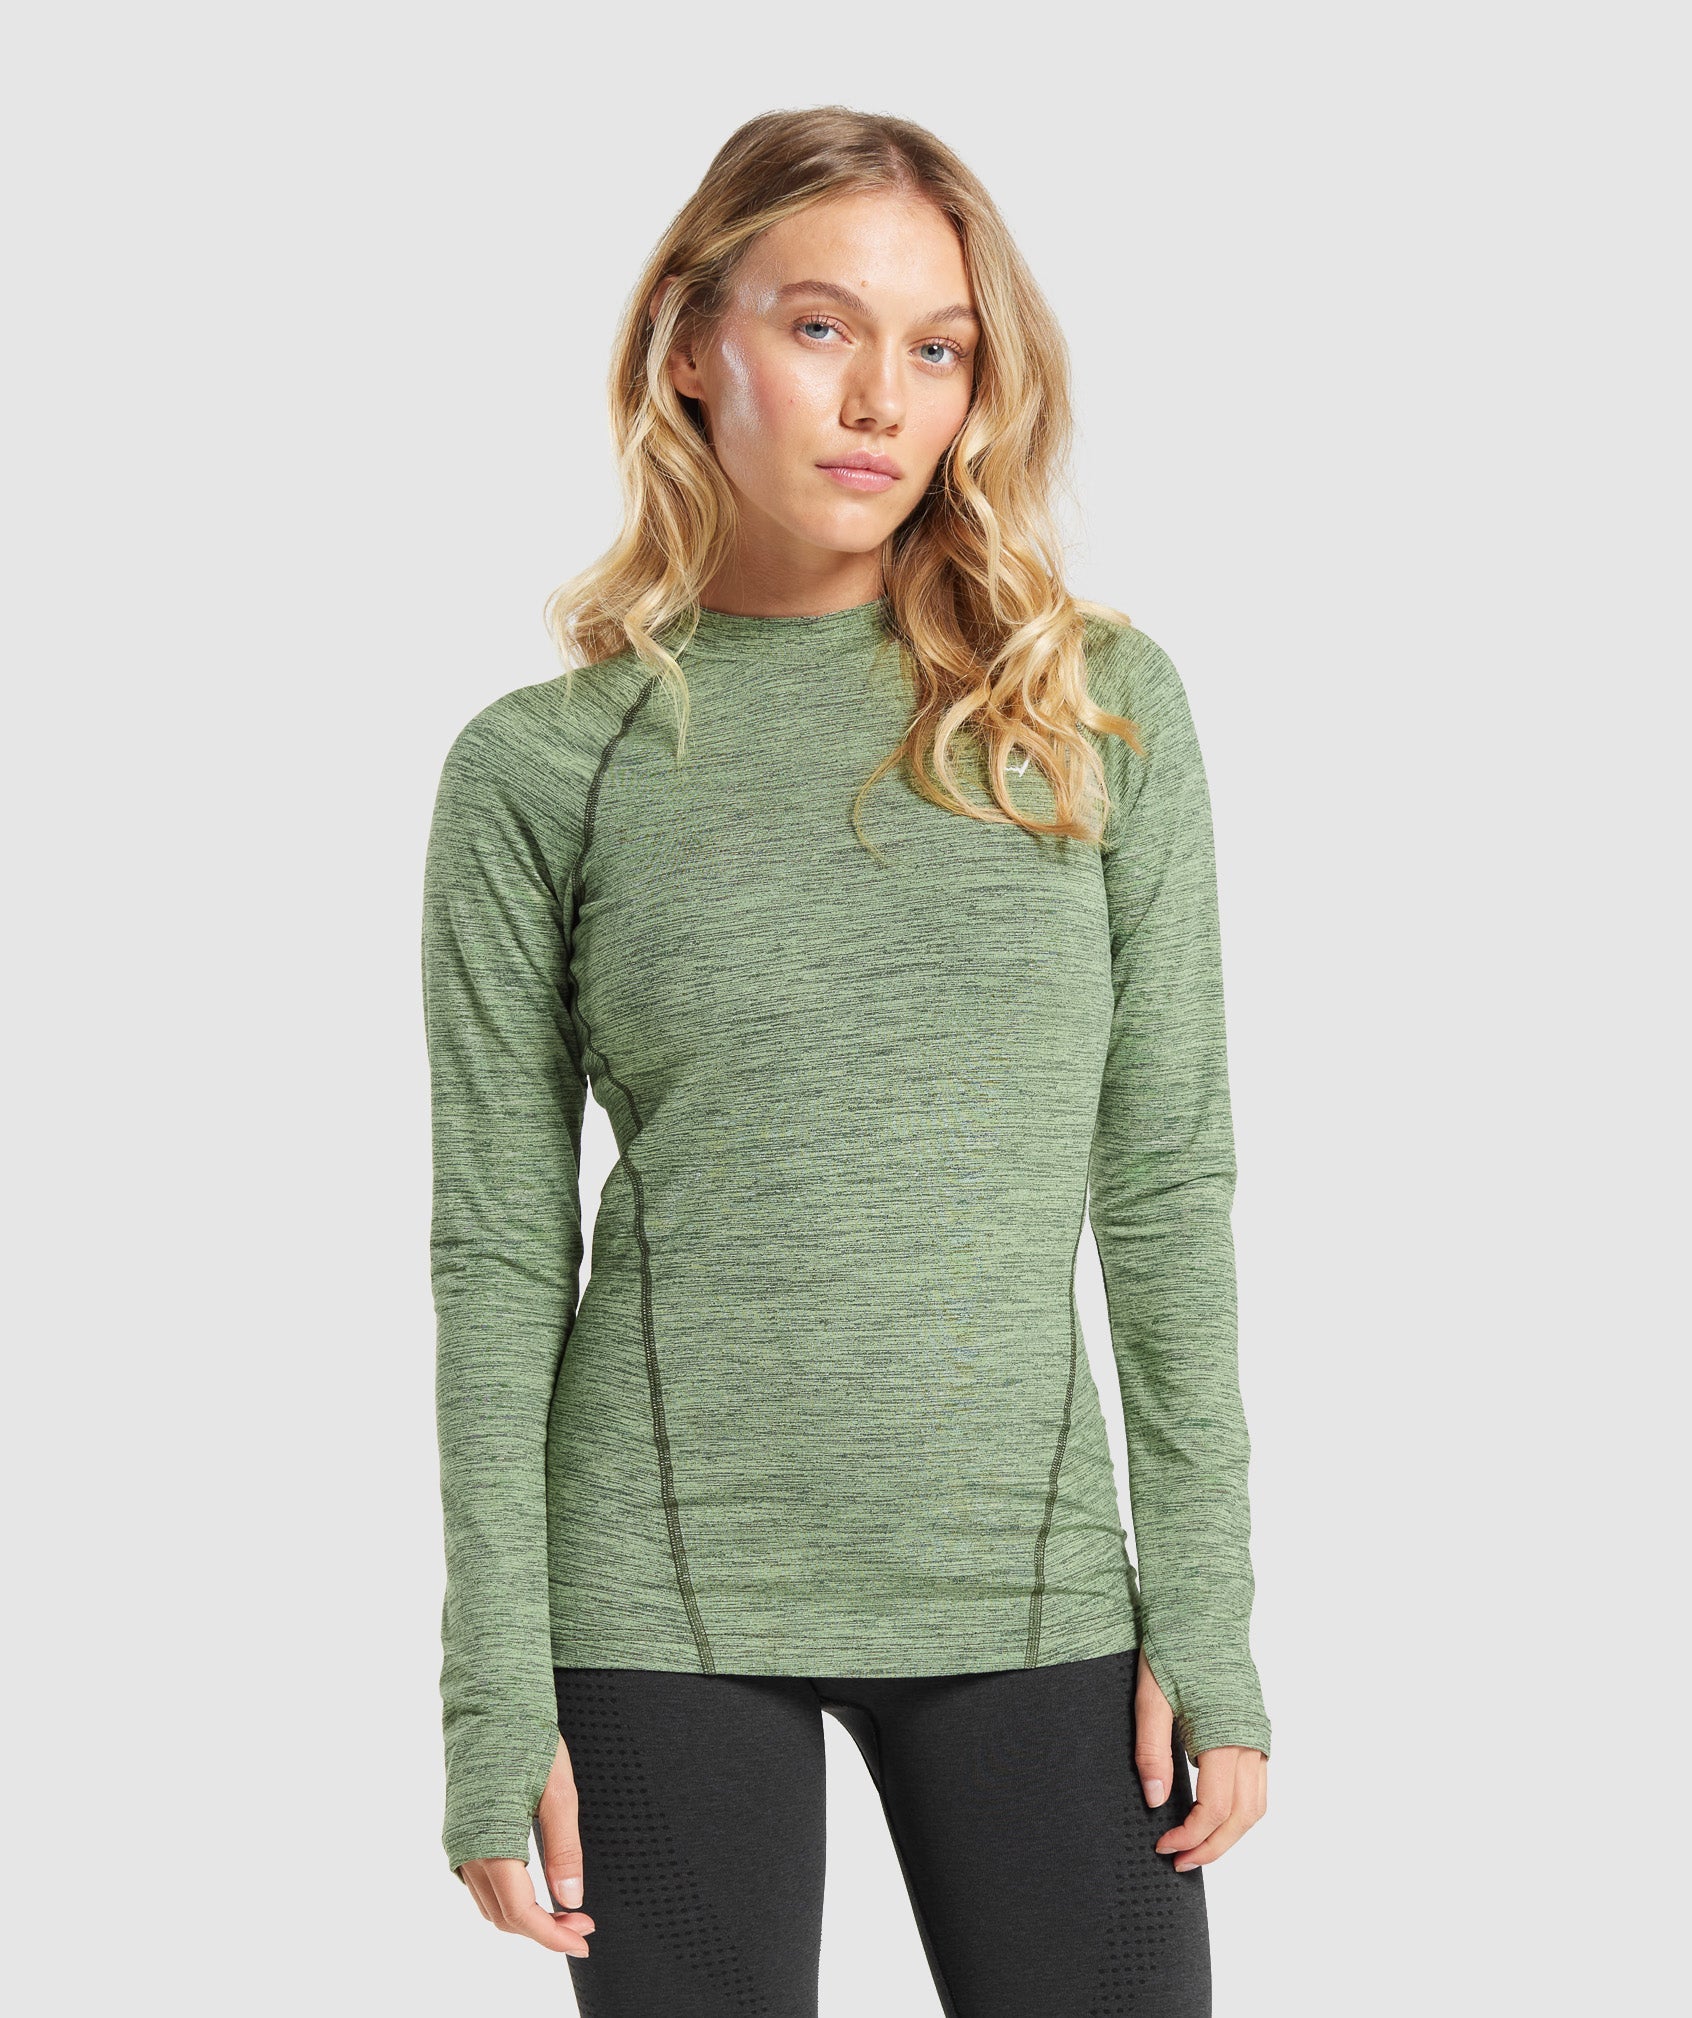 Fleece Lined Long Sleeve Top in {{variantColor} is out of stock